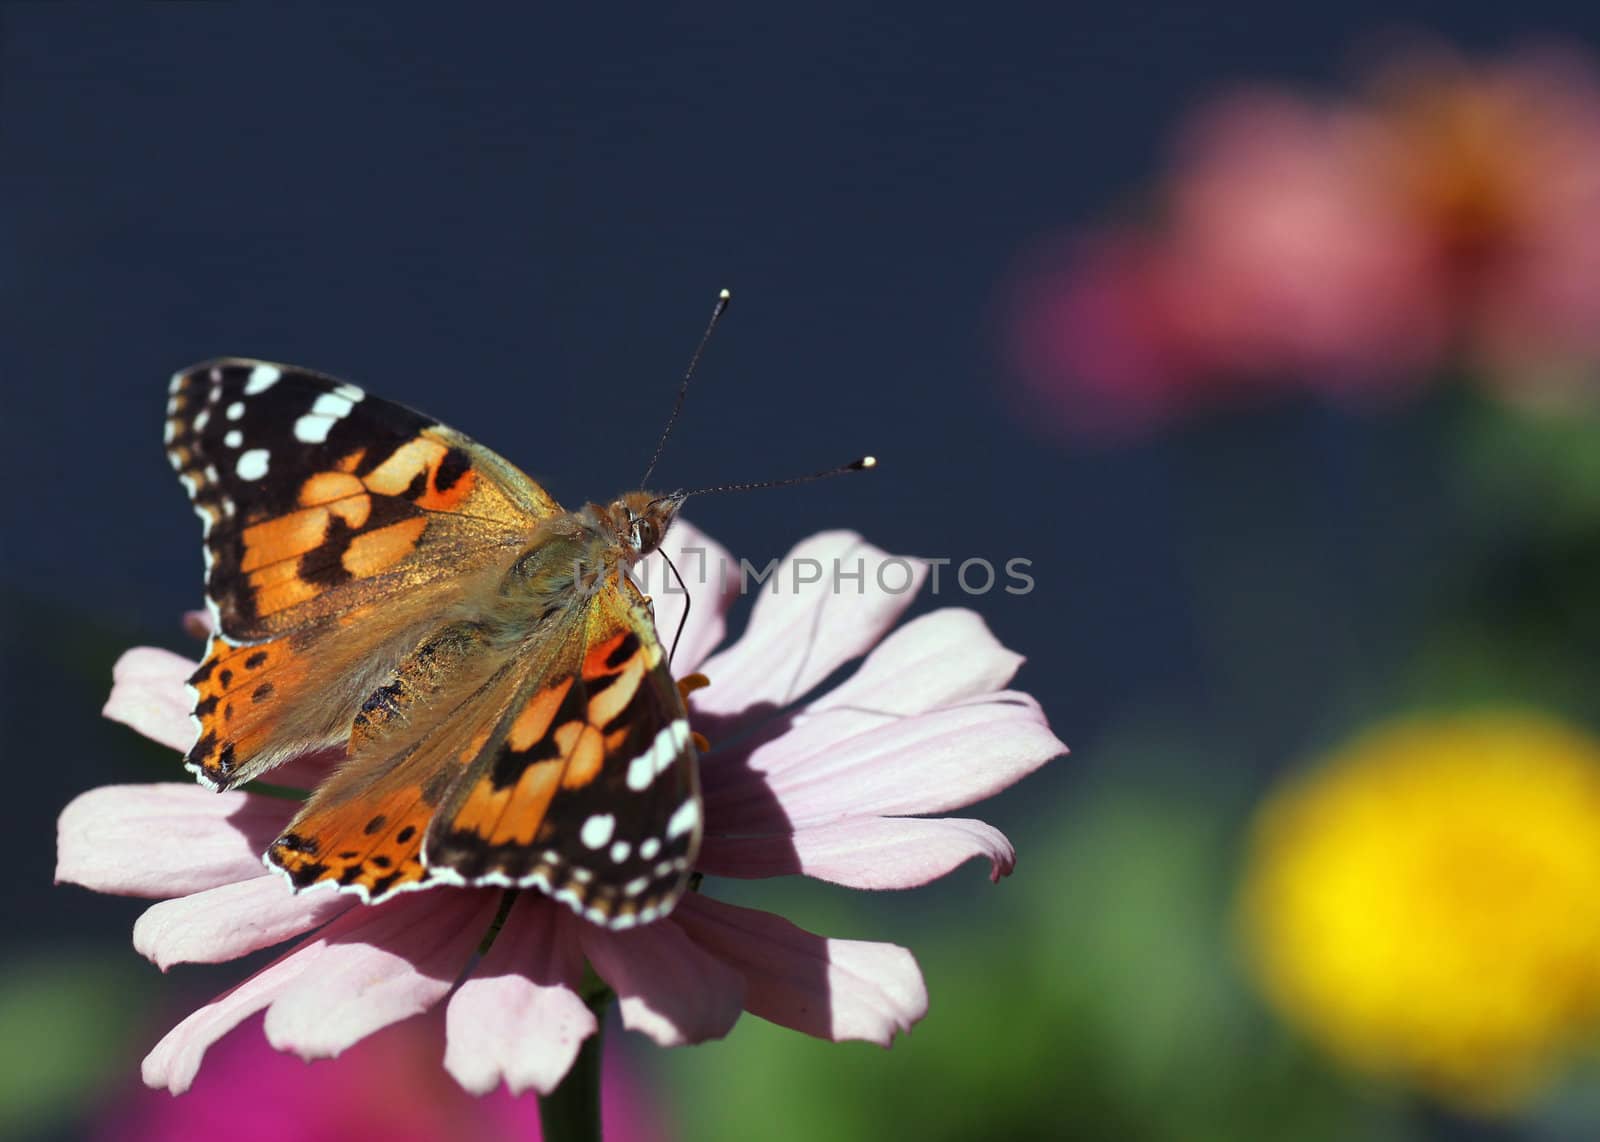 butterfly (Painted Lady) on flower in a garden